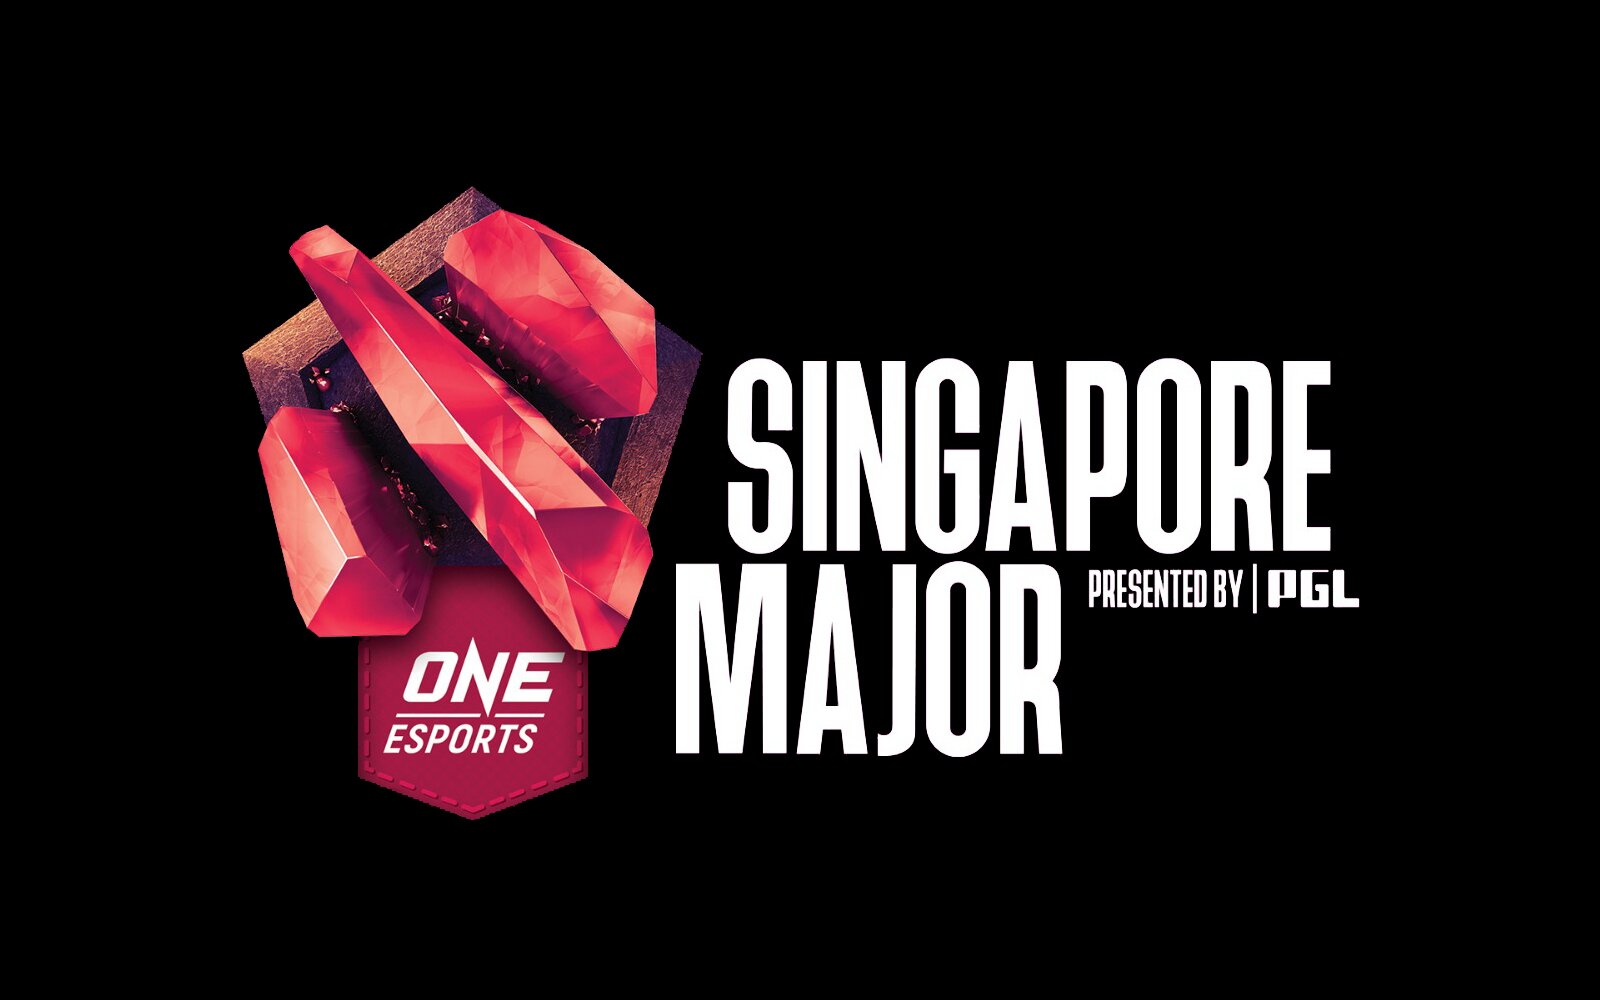 The ONE Esports Singapore Major will be the first DPC event in Southeast Asia since 2018.